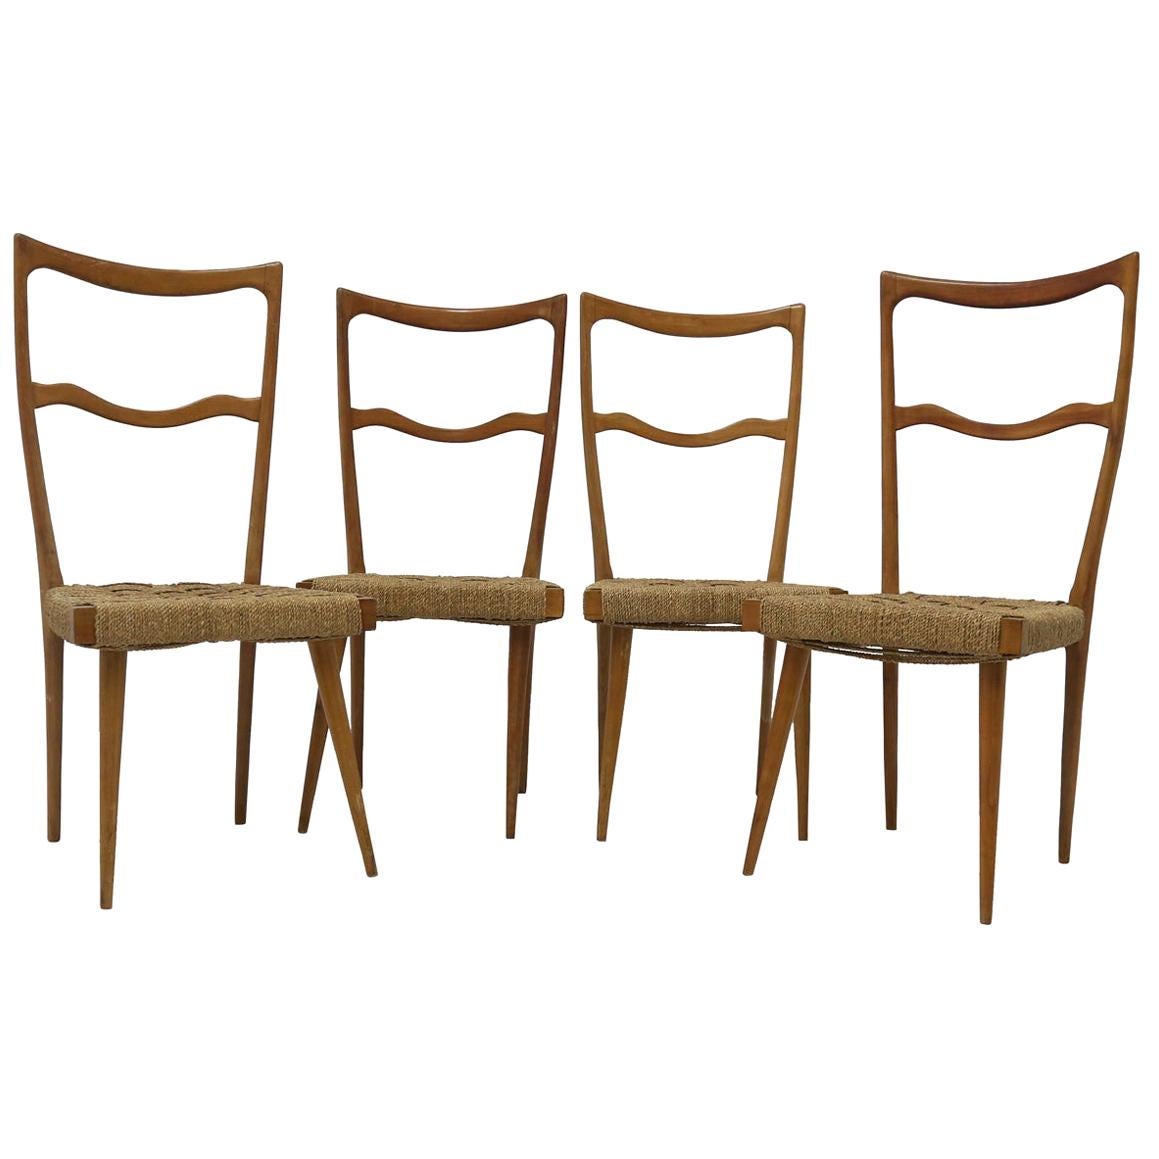 Set of 4 Italian Ladder Back Chairs in the Manner of Gio Ponti